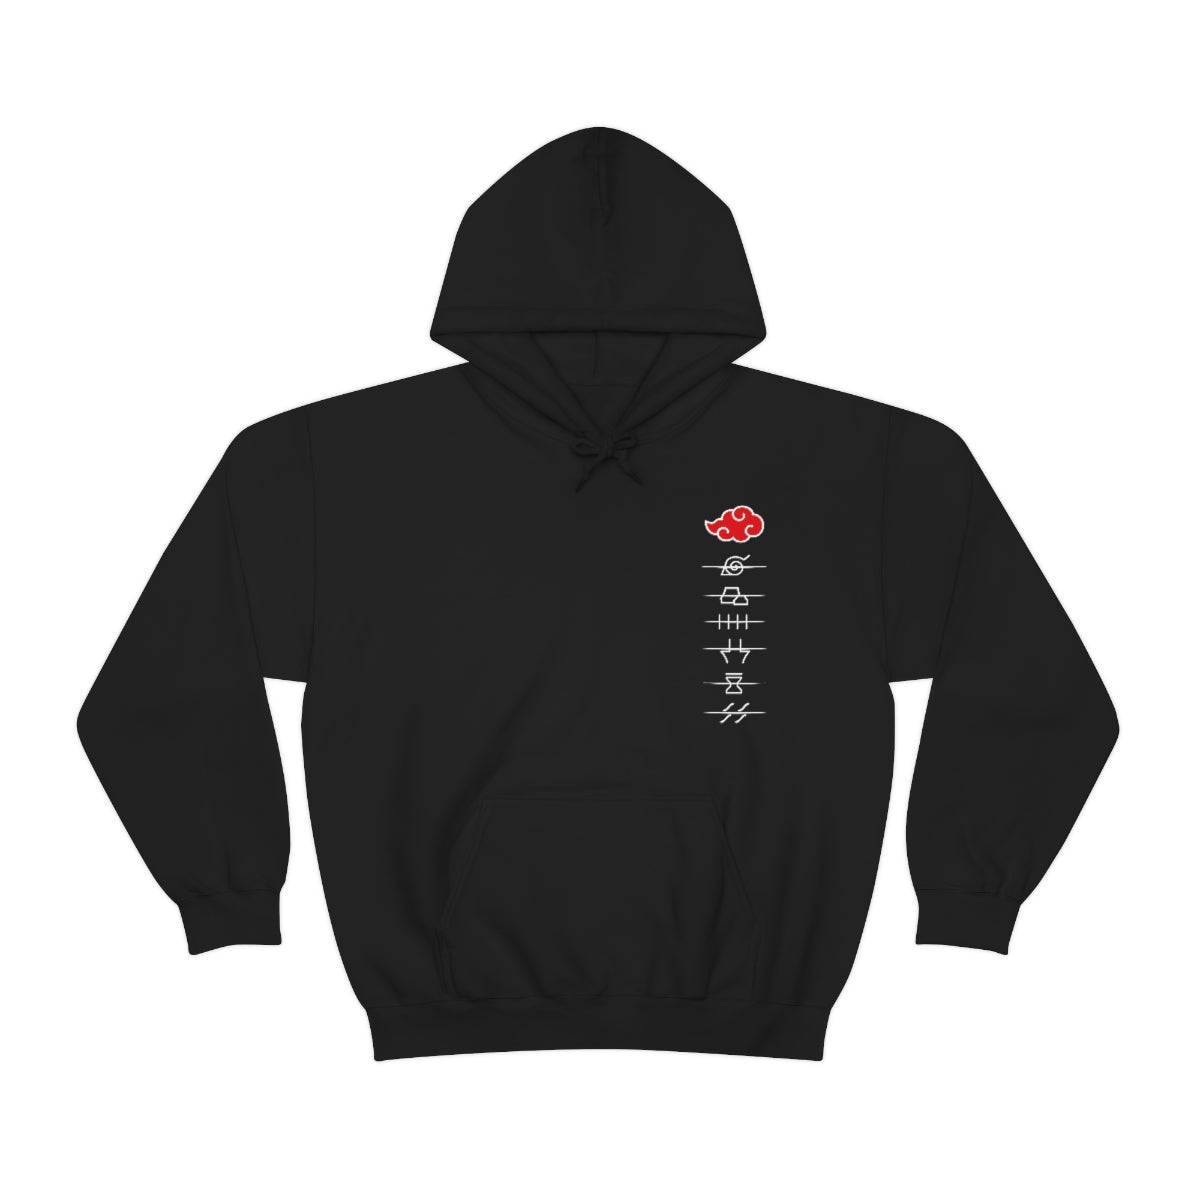 Akatsuki Naruto Anime Hoodie (Front & Back Design) - One Punch Fits